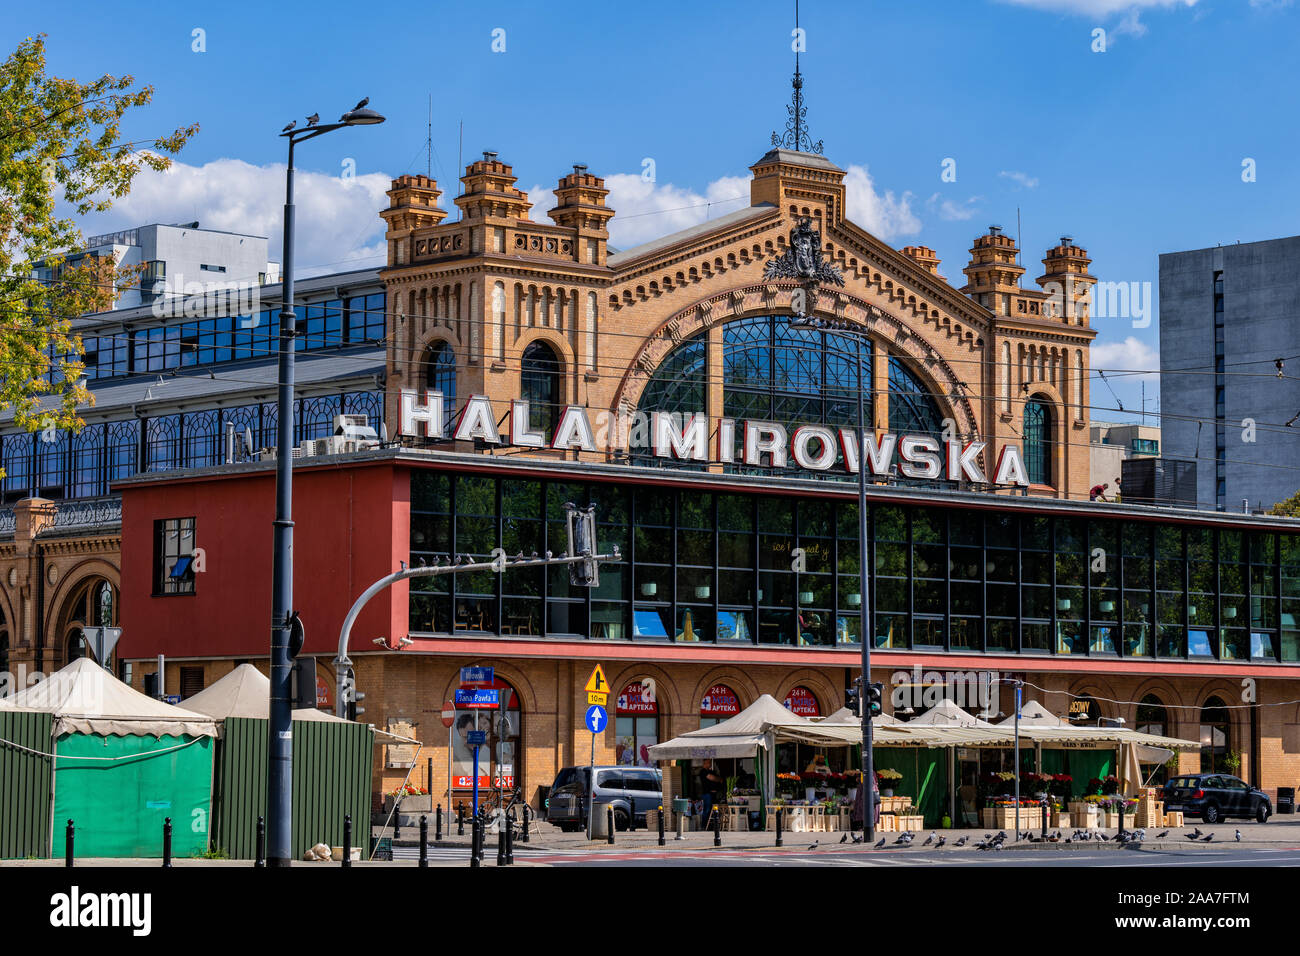 Warsaw, Poland - August 15, 2019: Hala Mirowska market in historic  building, city landmark constructed between 1899 and 1901 Stock Photo -  Alamy